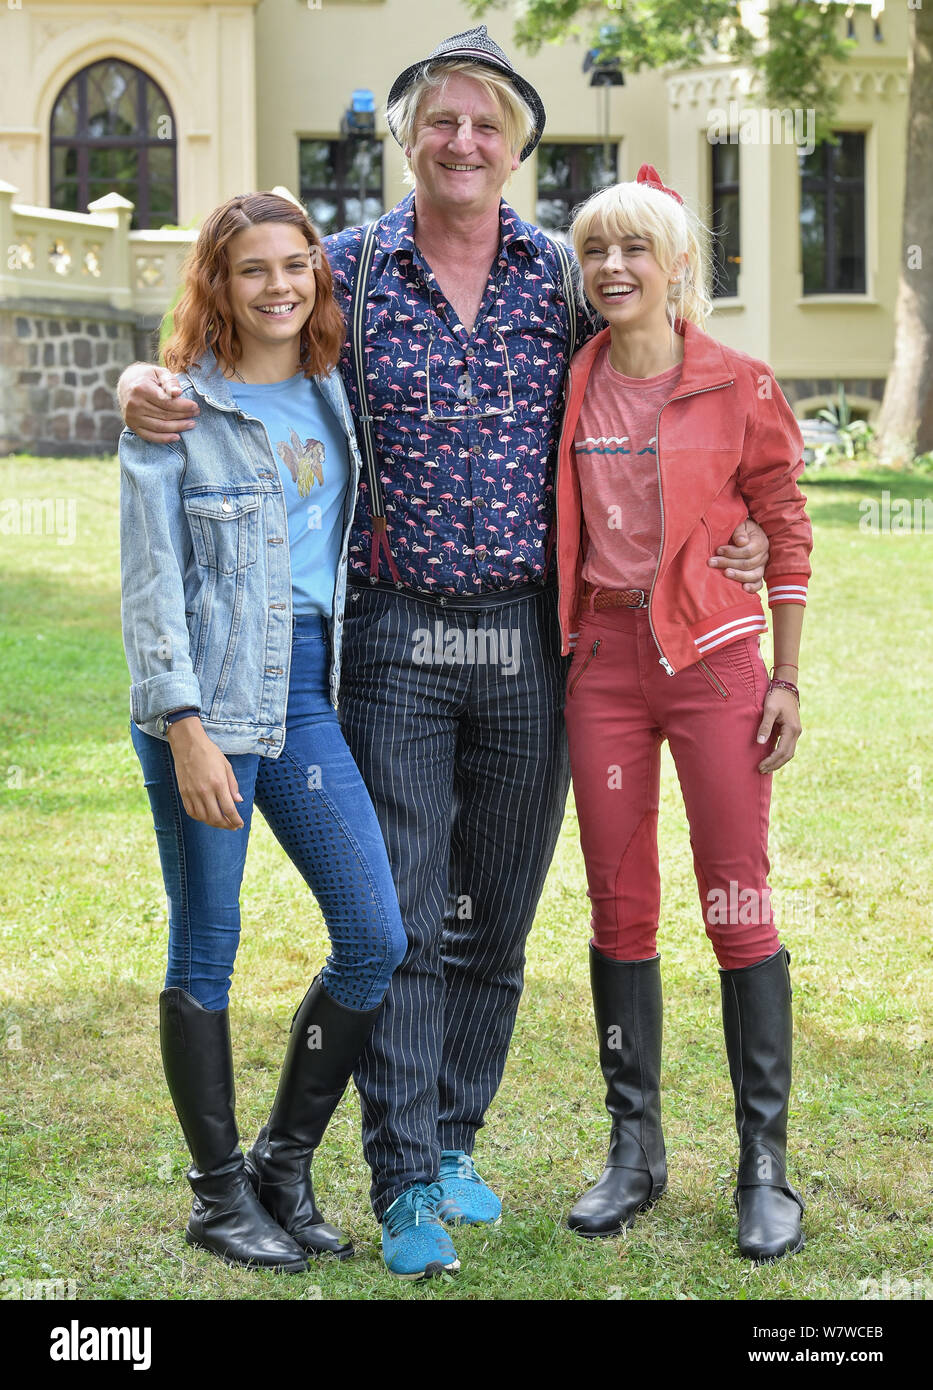 06 August 2019, Brandenburg, Reichenow: Actress Harriet Herbig-Matten (l) as Tina, director Detlev Buck and actress Katharina Hirschberg as Bibi stand on the set of the Amazon series Bibi and Tina in front of Schloss Reichenow. The shooting of the new Amazon Original Bibi & Tina is currently underway in the Berlin area. The live action series for the whole family accompanies the young witch Bibi Blocksberg and her best friend Tina on their adventures at the Reiterhof. The new series is to be shot by mid-August and will be available exclusively to Prime members from the first half of 2020. Phot Stock Photo